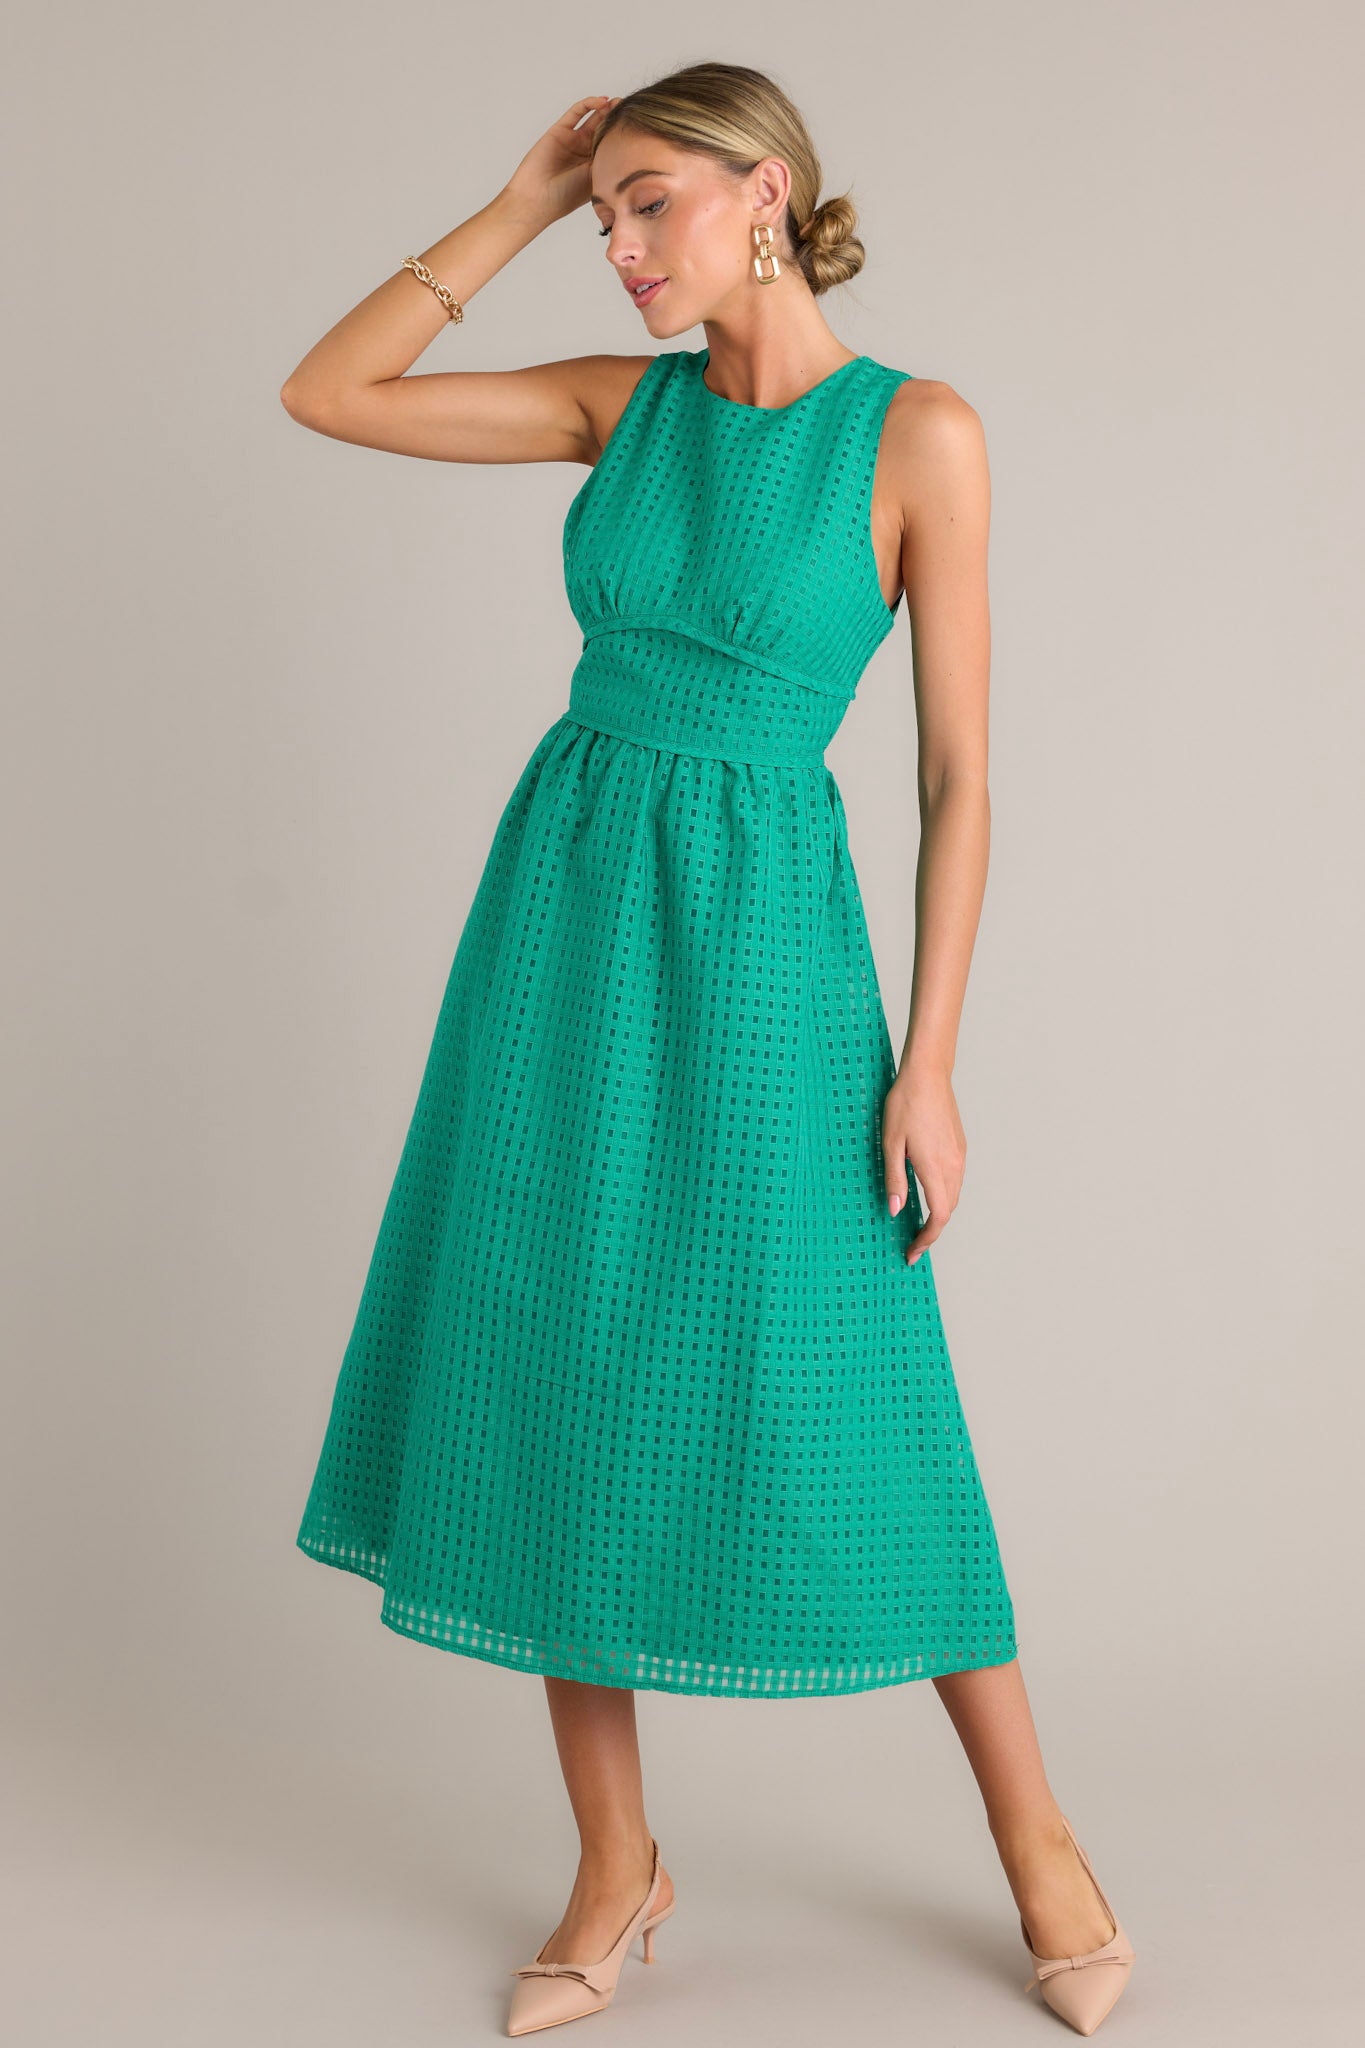 Action shot of a green midi dress displaying the fit and movement, highlighting the high neckline, thick waistband, grid-like pattern, and sleeveless design.